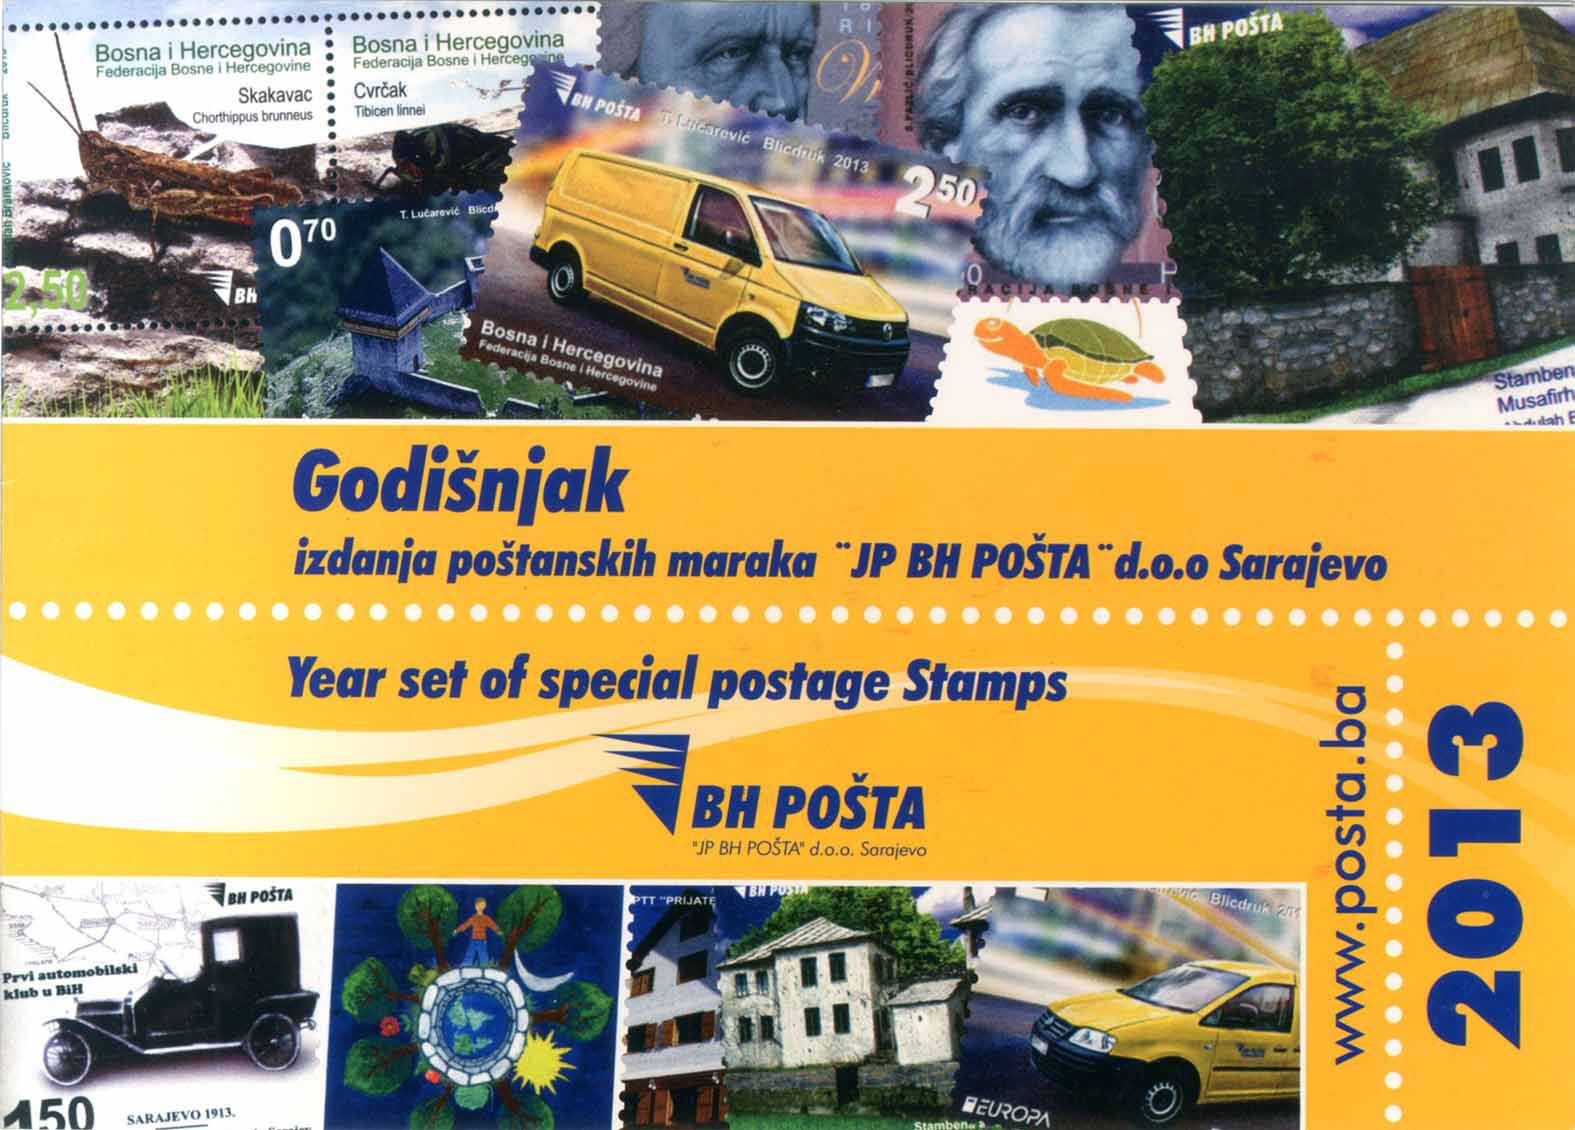 year-set-of-special-postage-stamps-2013